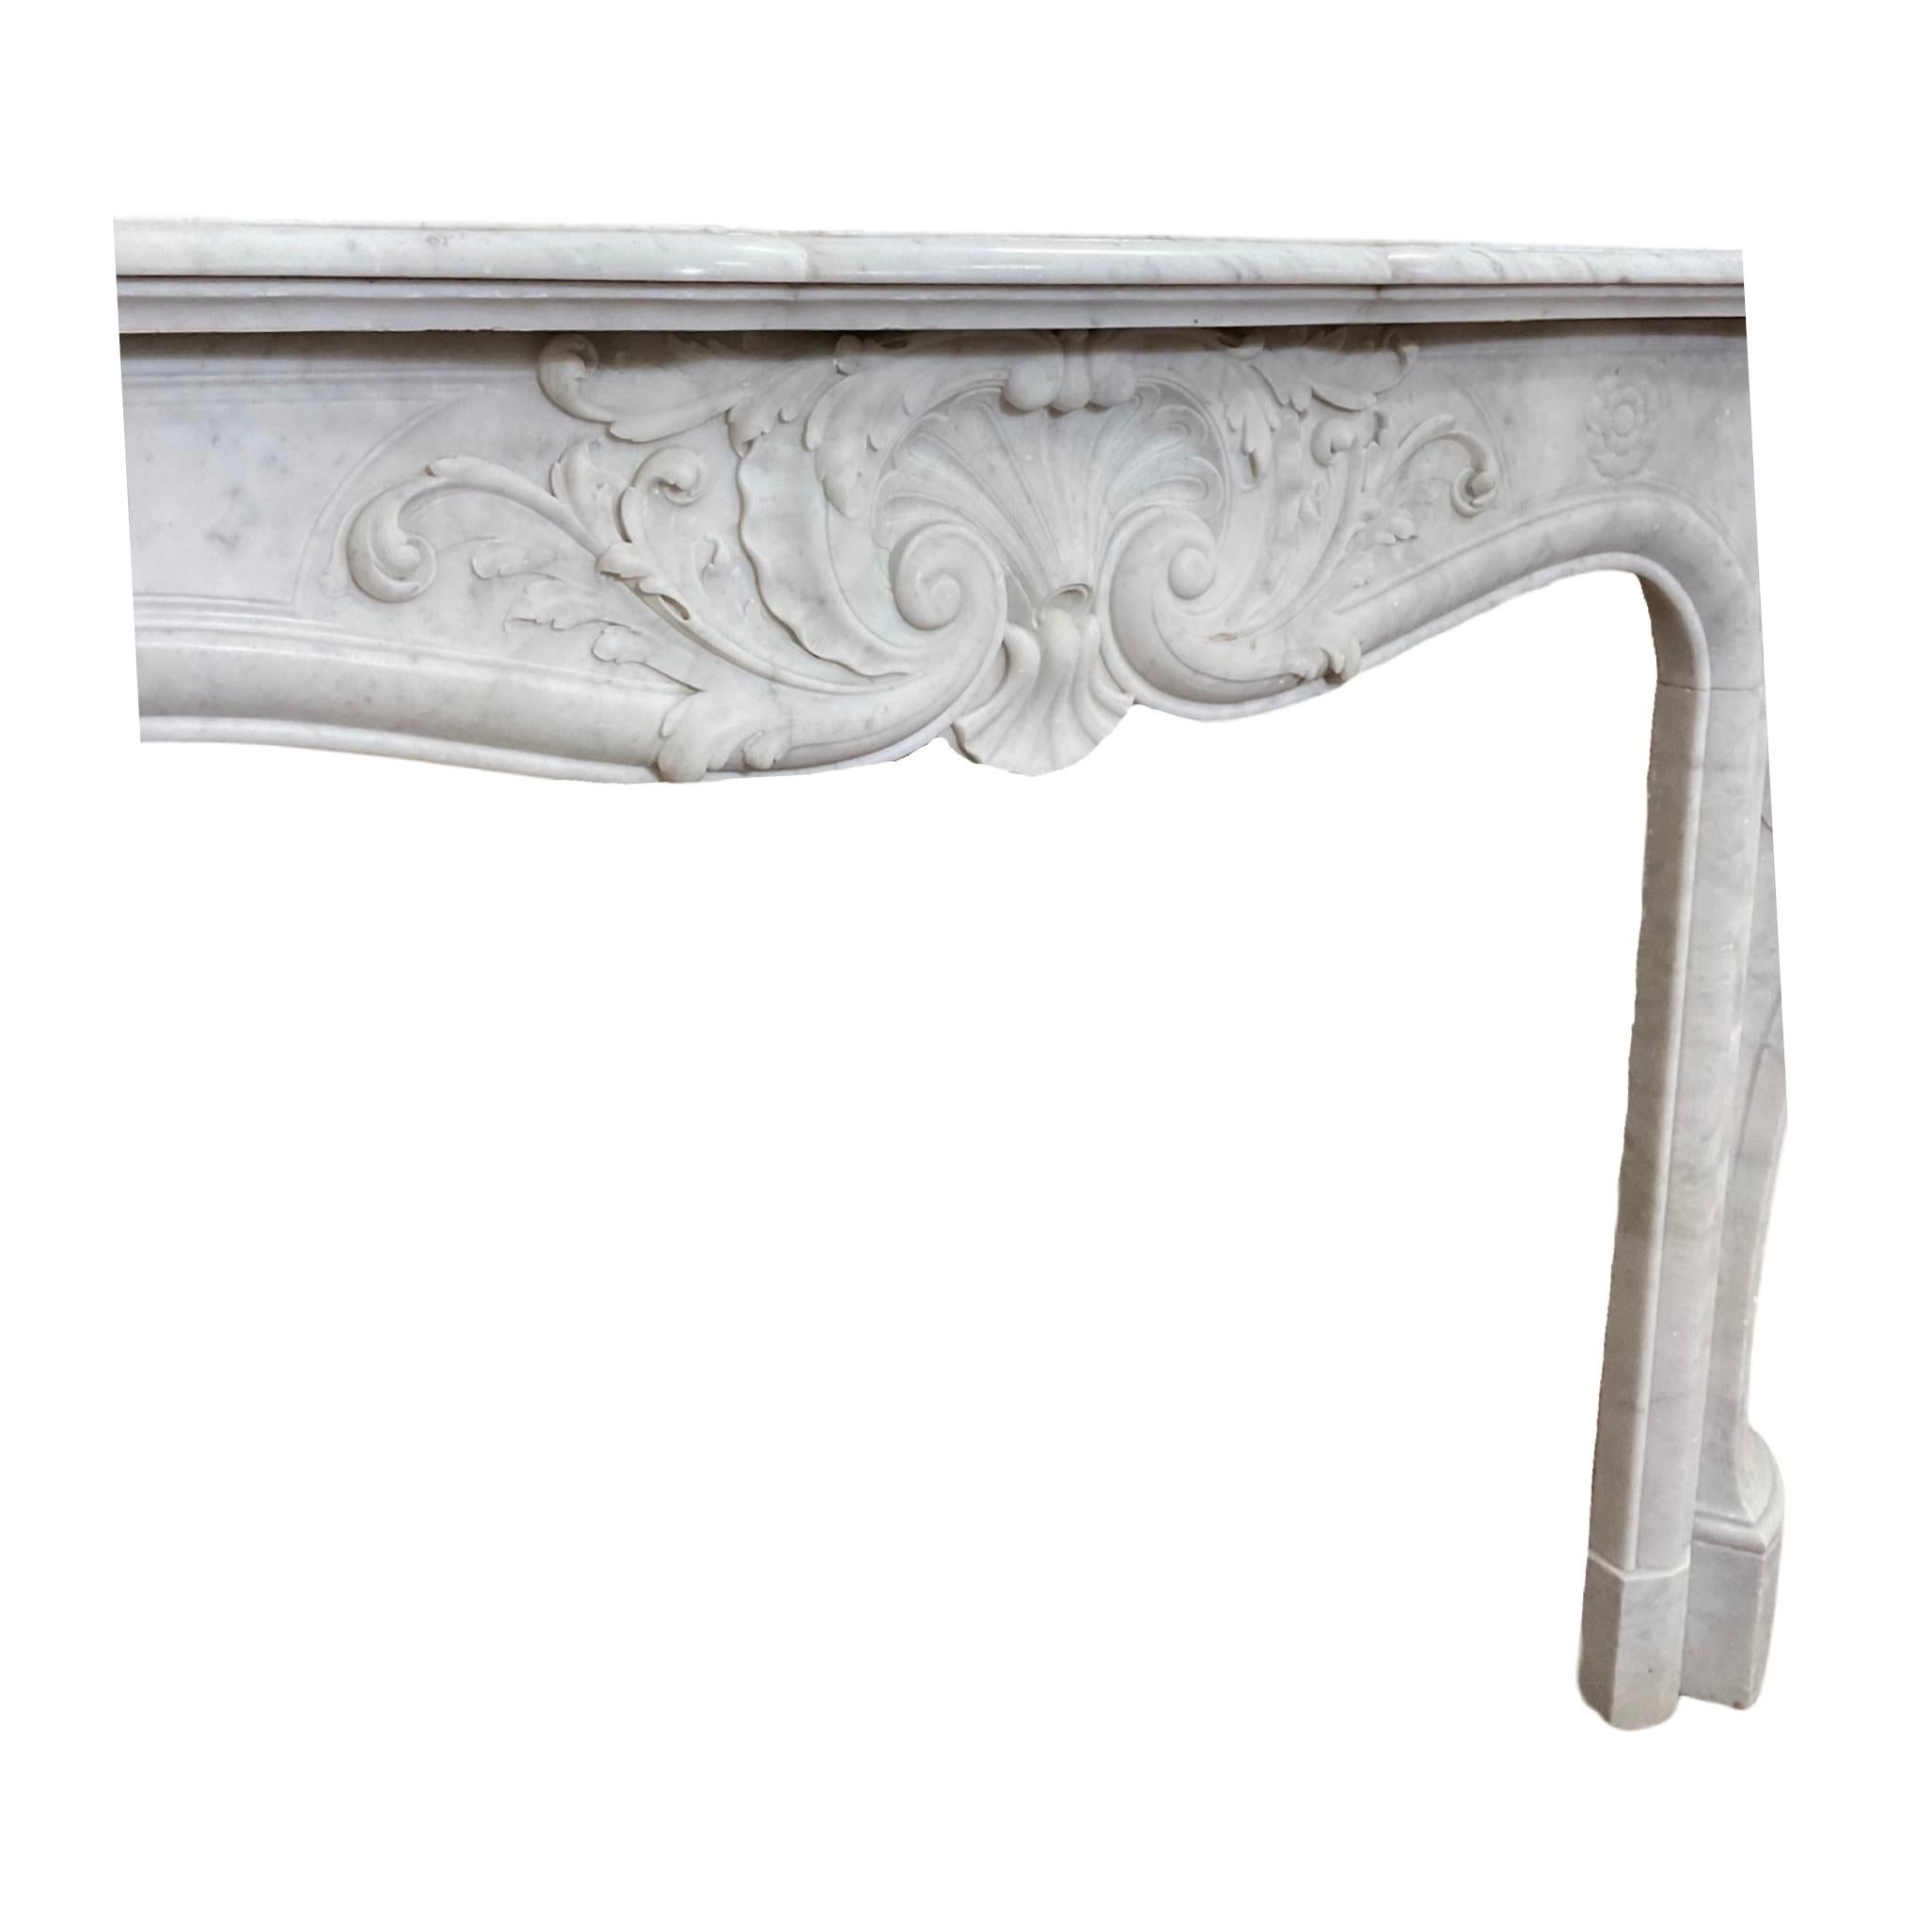 This French Carrara Marble mantel from the 1870s offers a luxurious louis xvi style with intricate carvings throughout the legs and center face. Crafted out of pure Carrara marble, this elegant mantel features a beautiful white color, plus a bronze